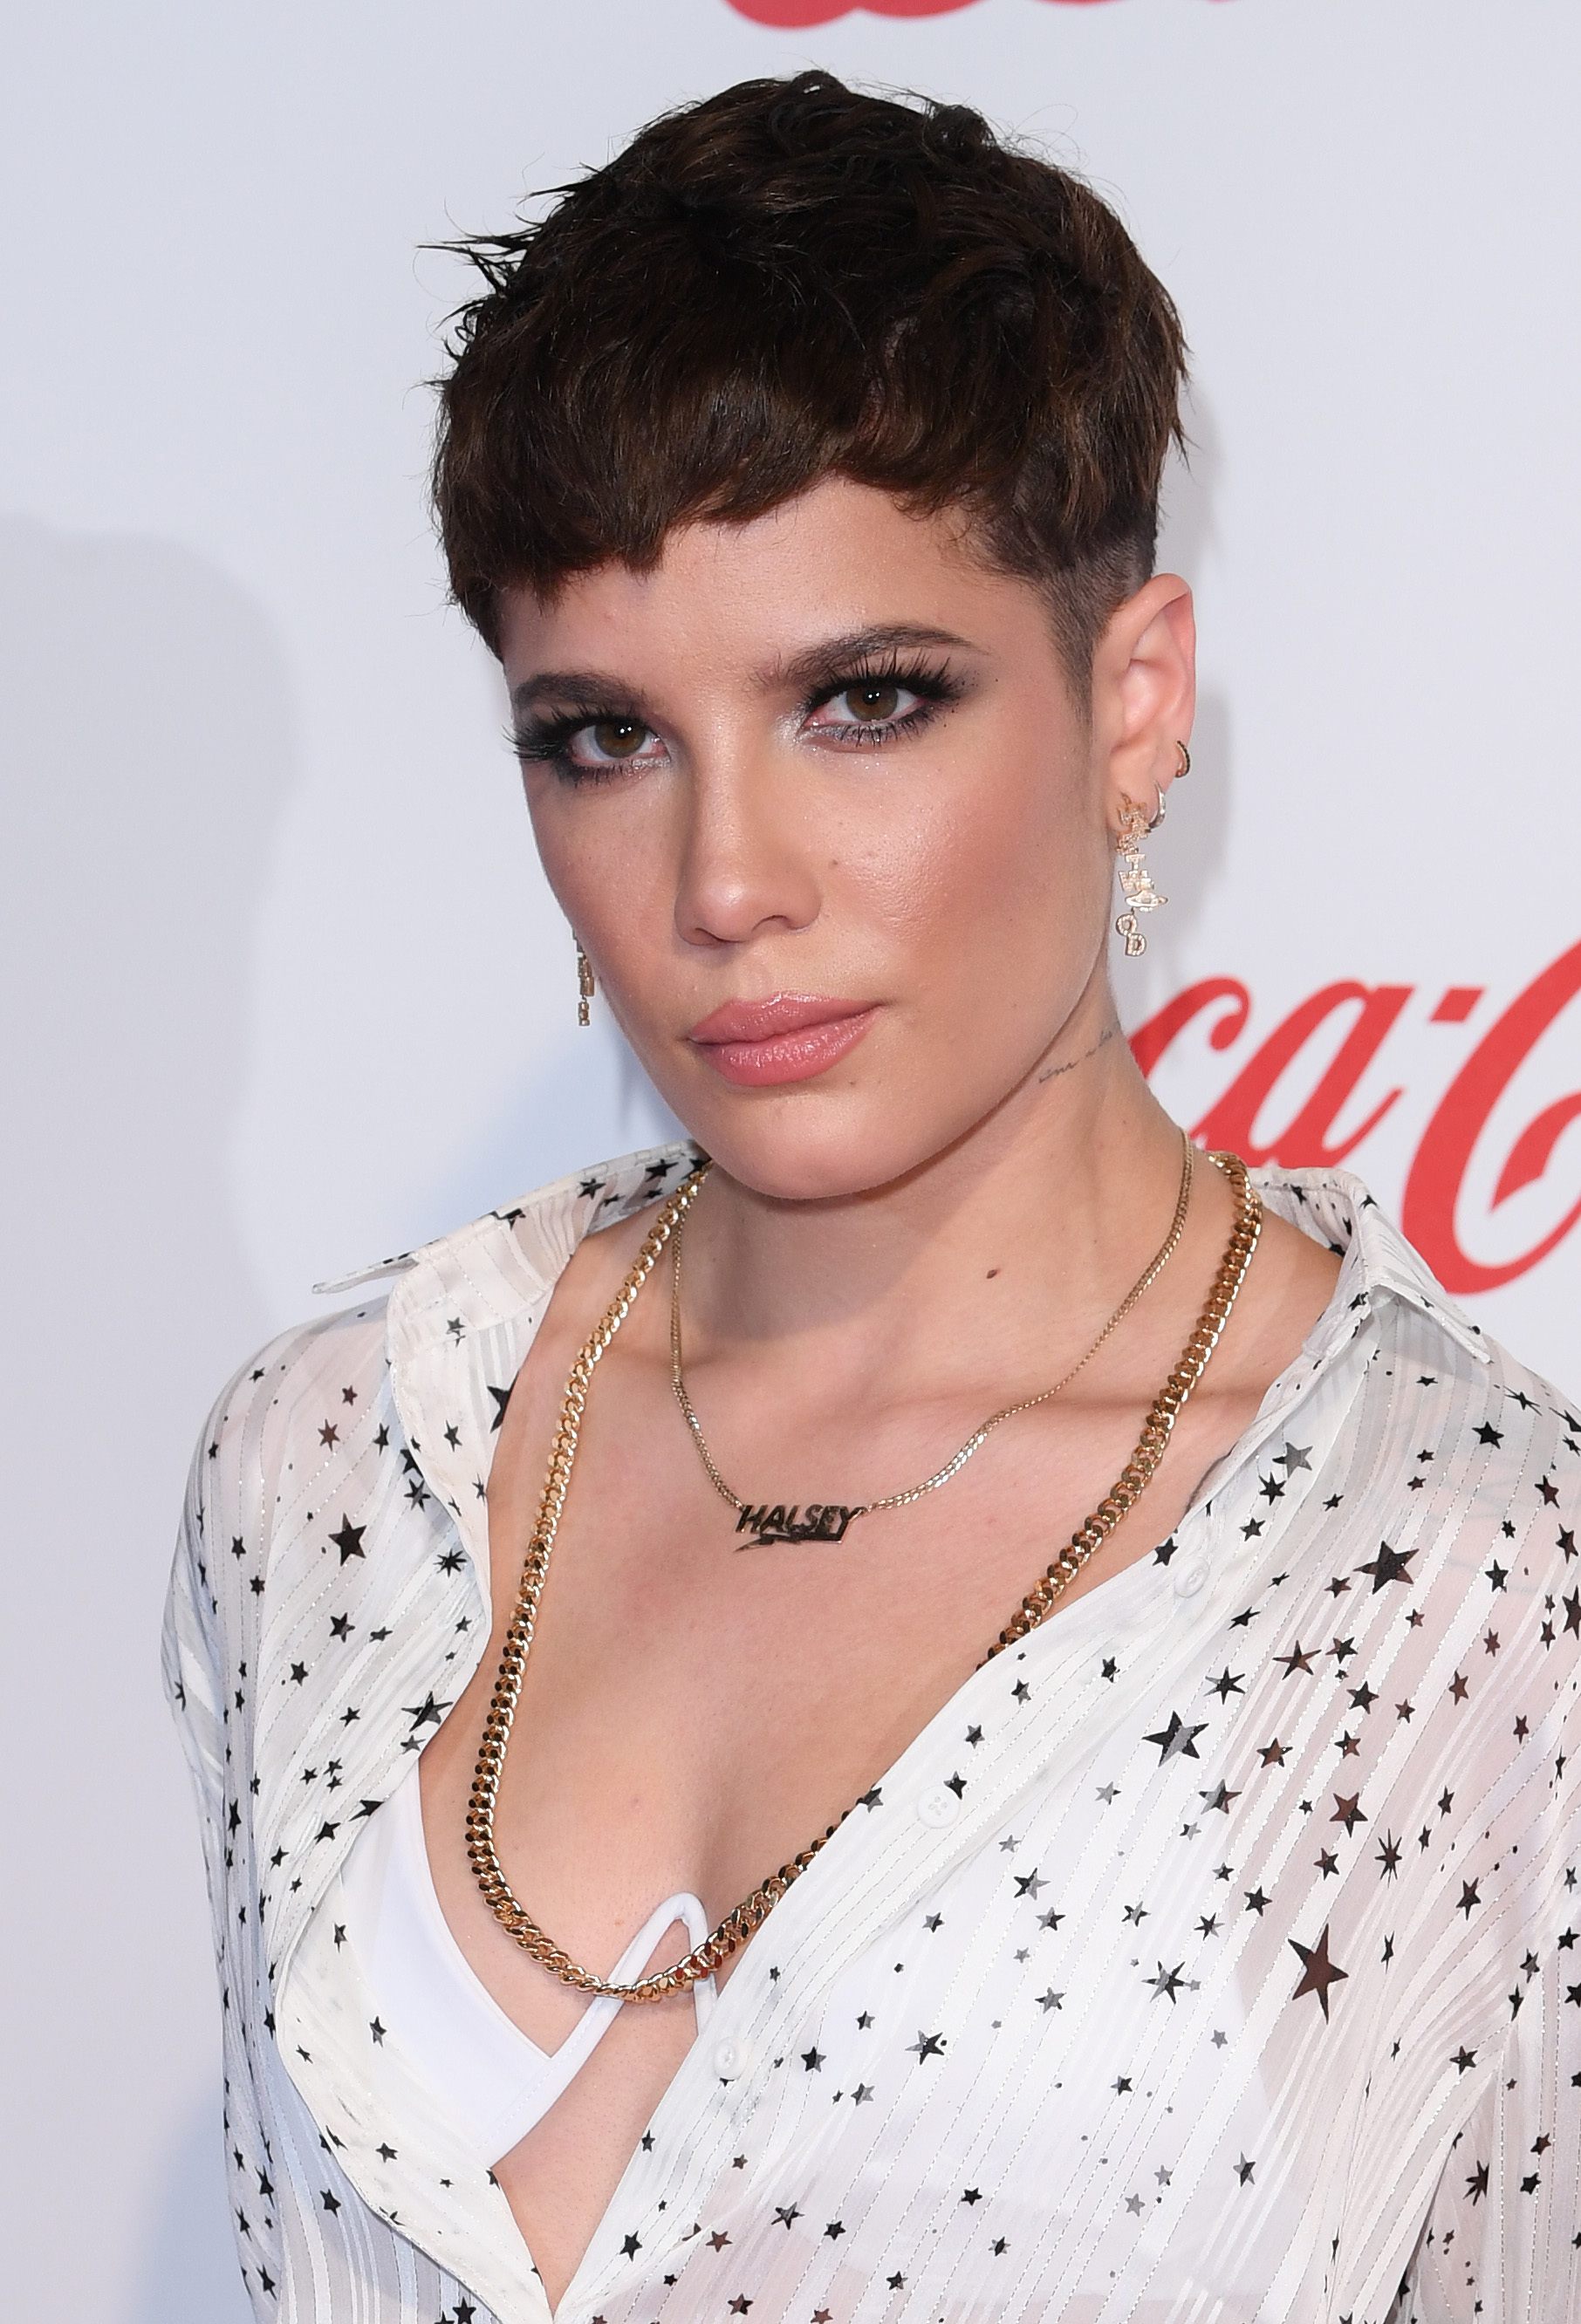 Haircuts for fine hair: Halsey with dark brown choppy pixie with low fade, wearing a white beaded dress with necklaces on the red carpet